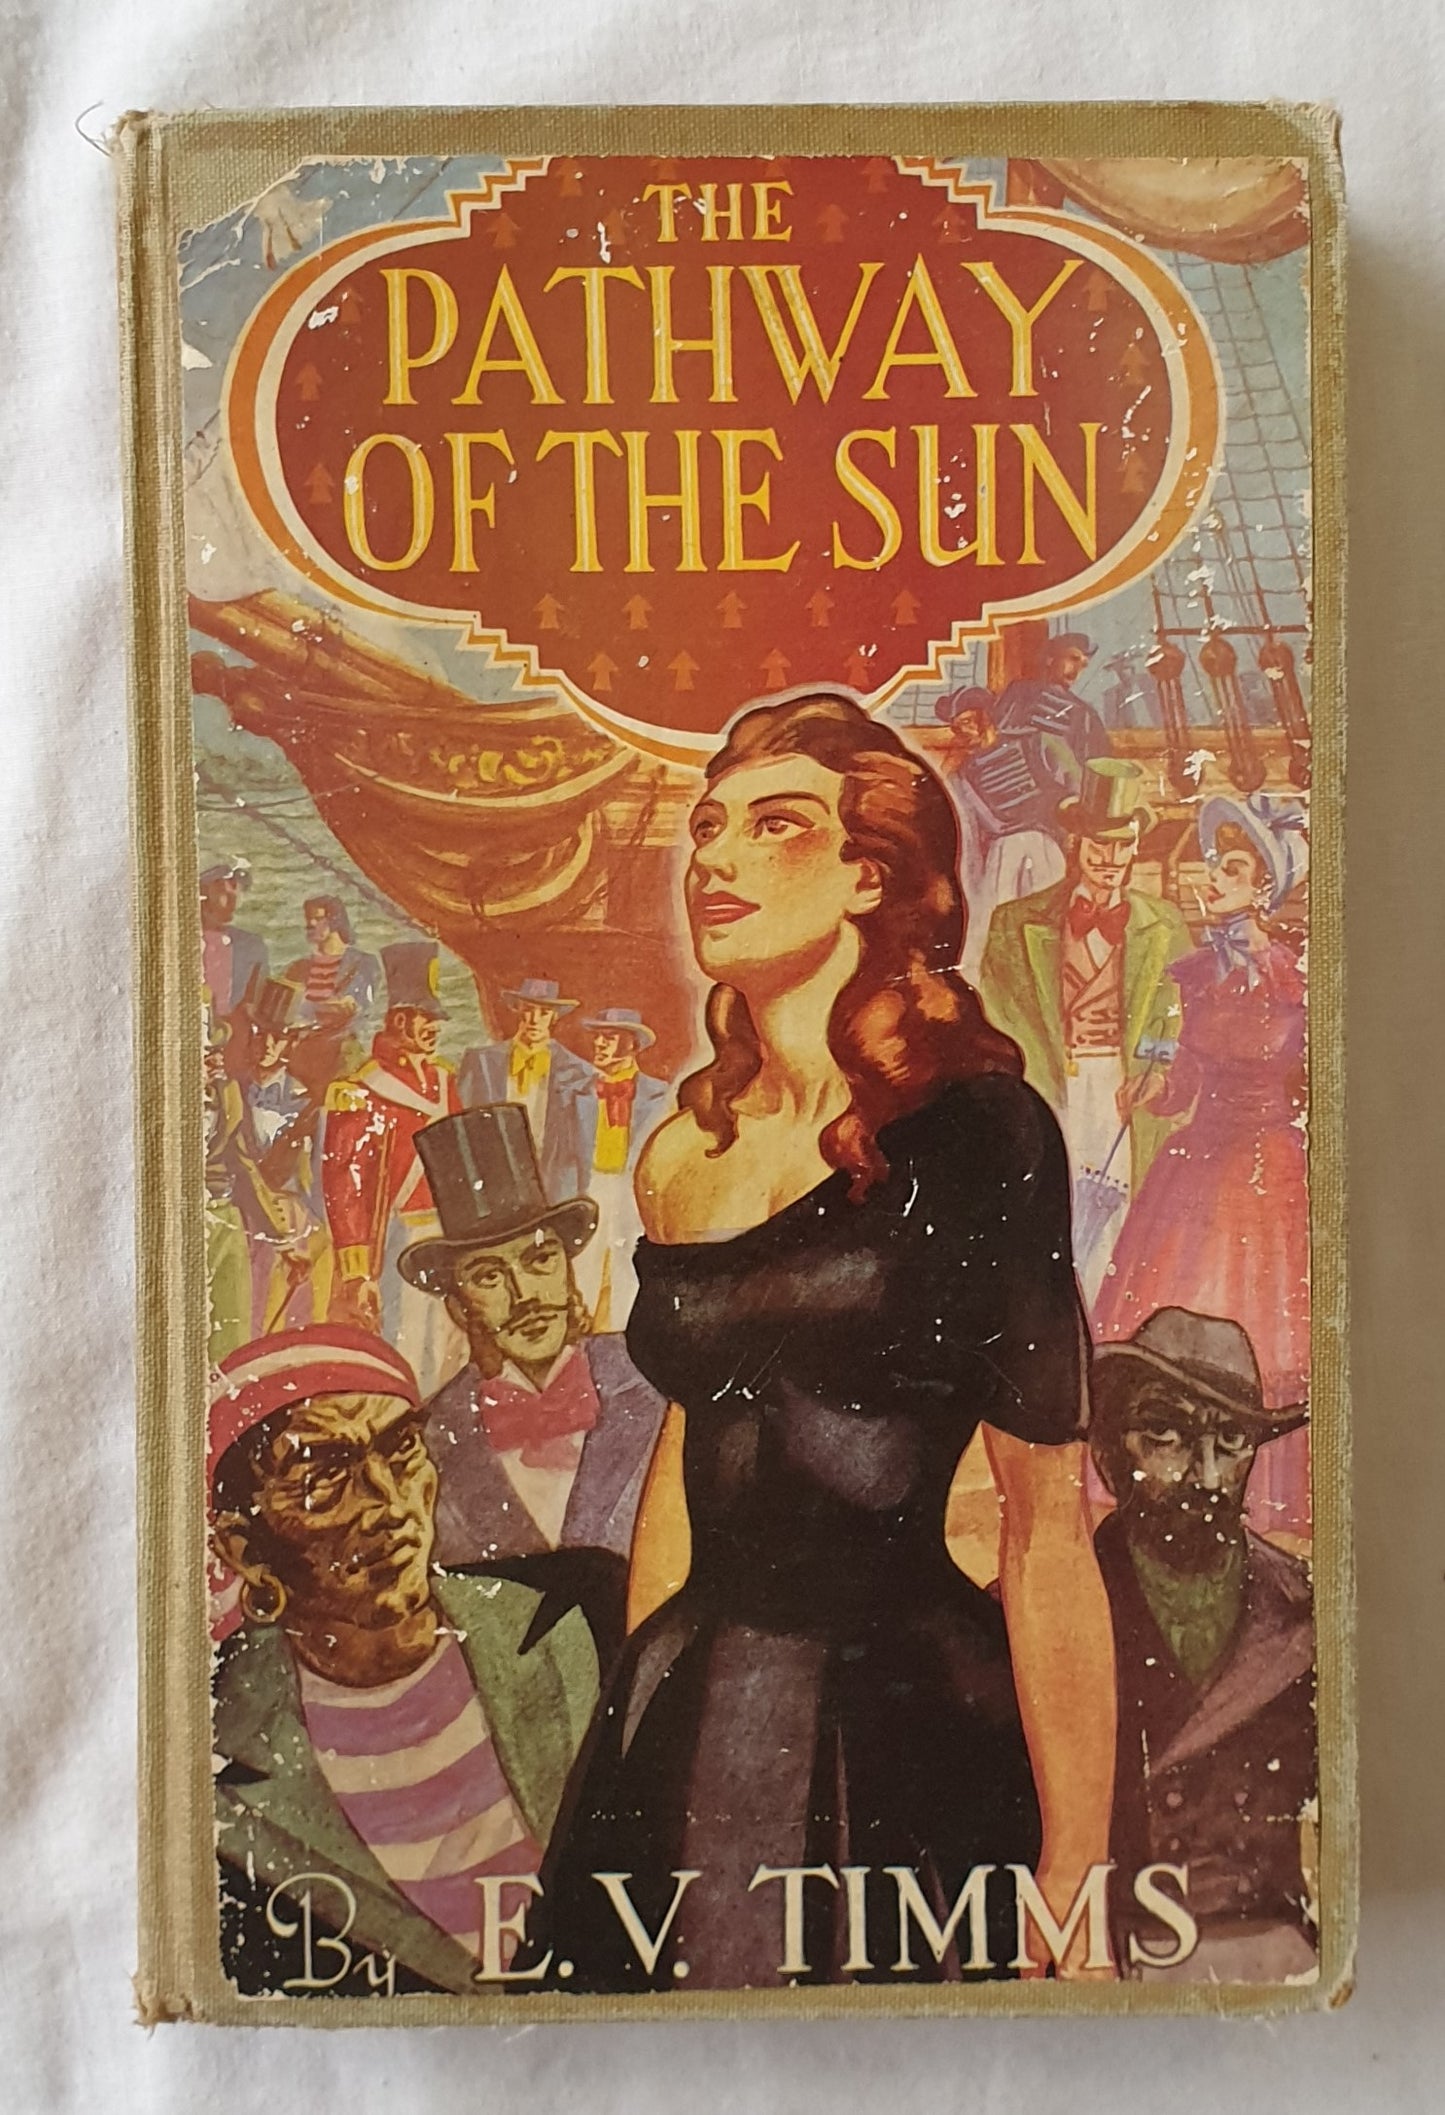 The Pathway of the Sun by E. V. Timms